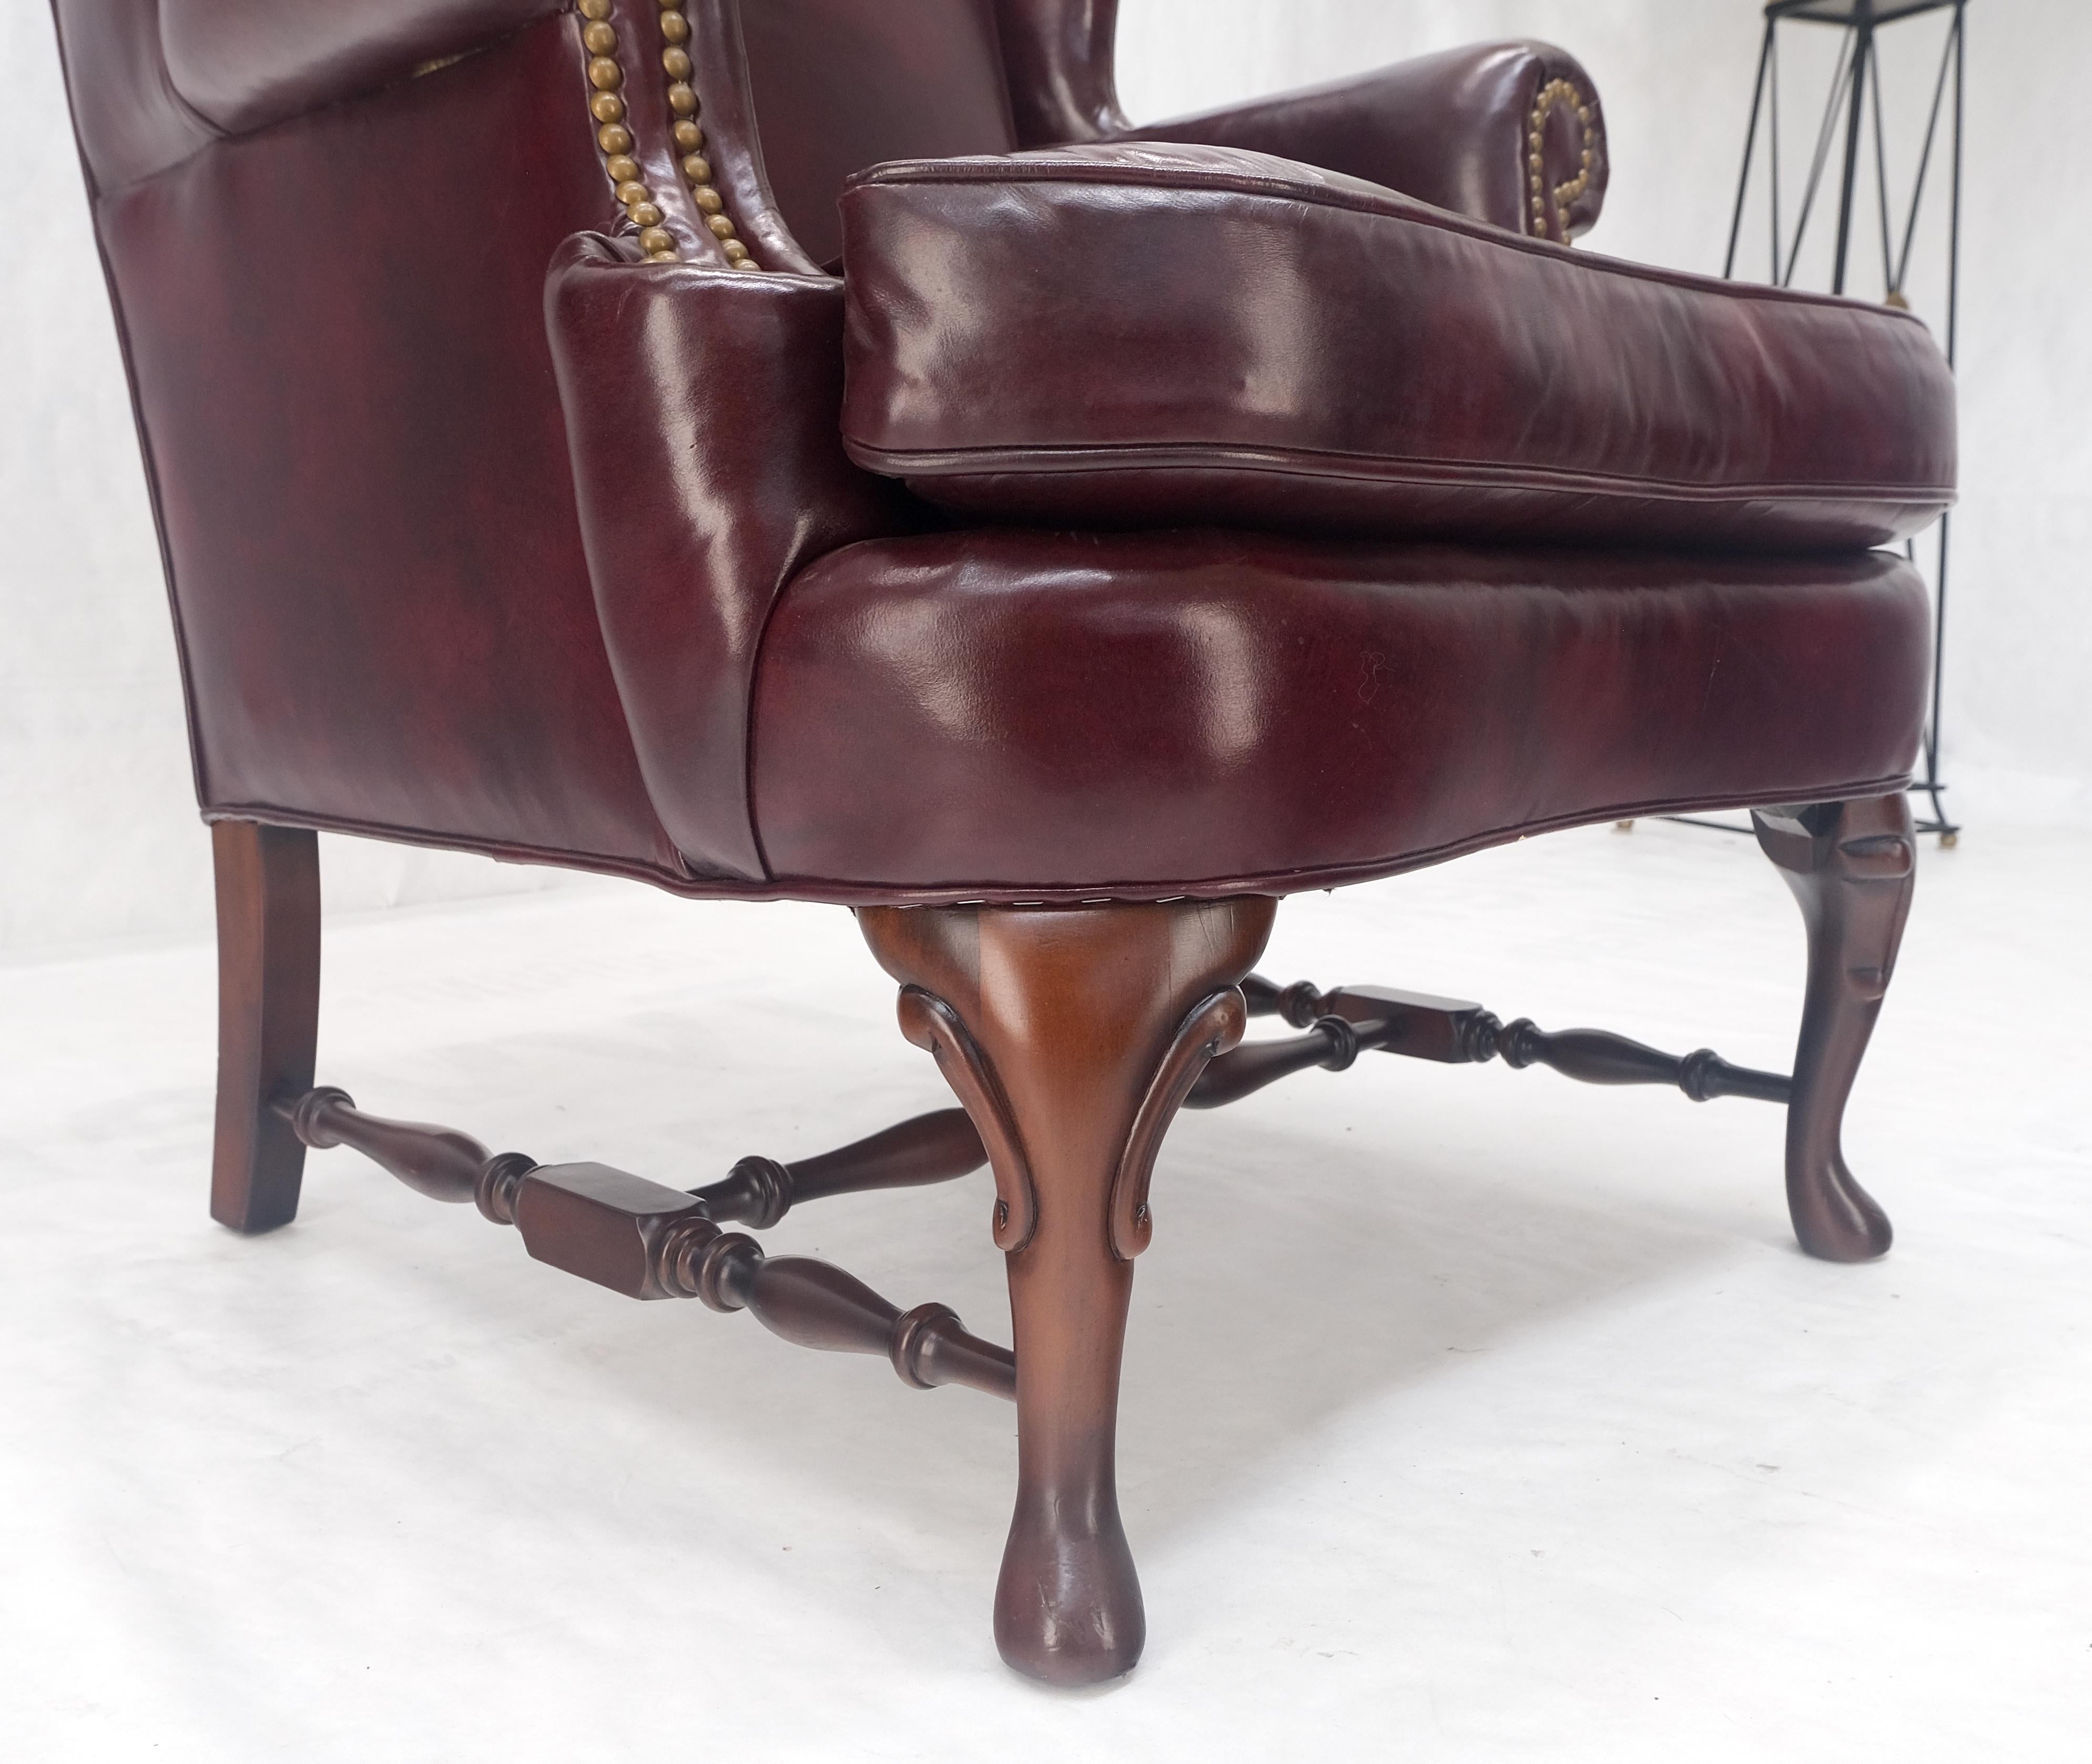 Kindel Burgundy Leather Upholstery Carved Mahogany Legs Wingback Chair & Ottoman For Sale 8